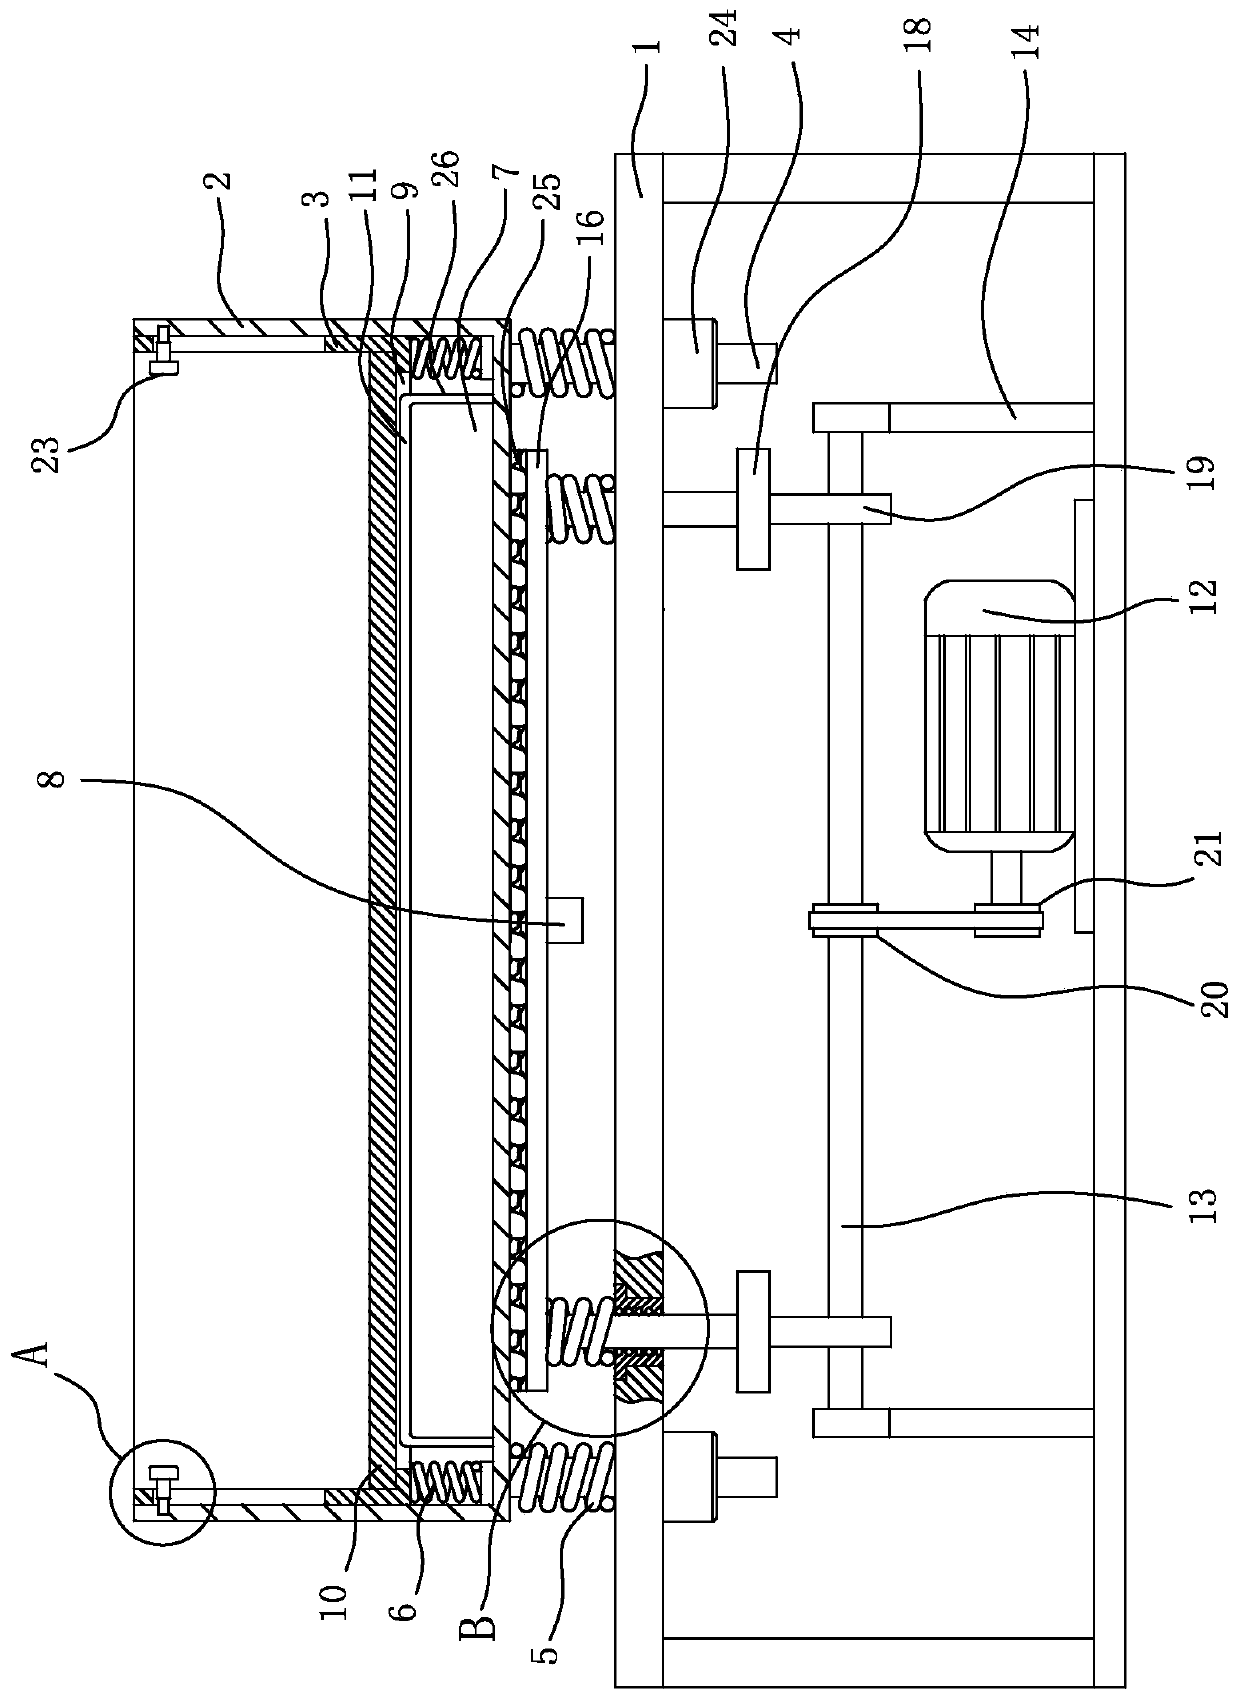 Draining device for processing of aquatic products